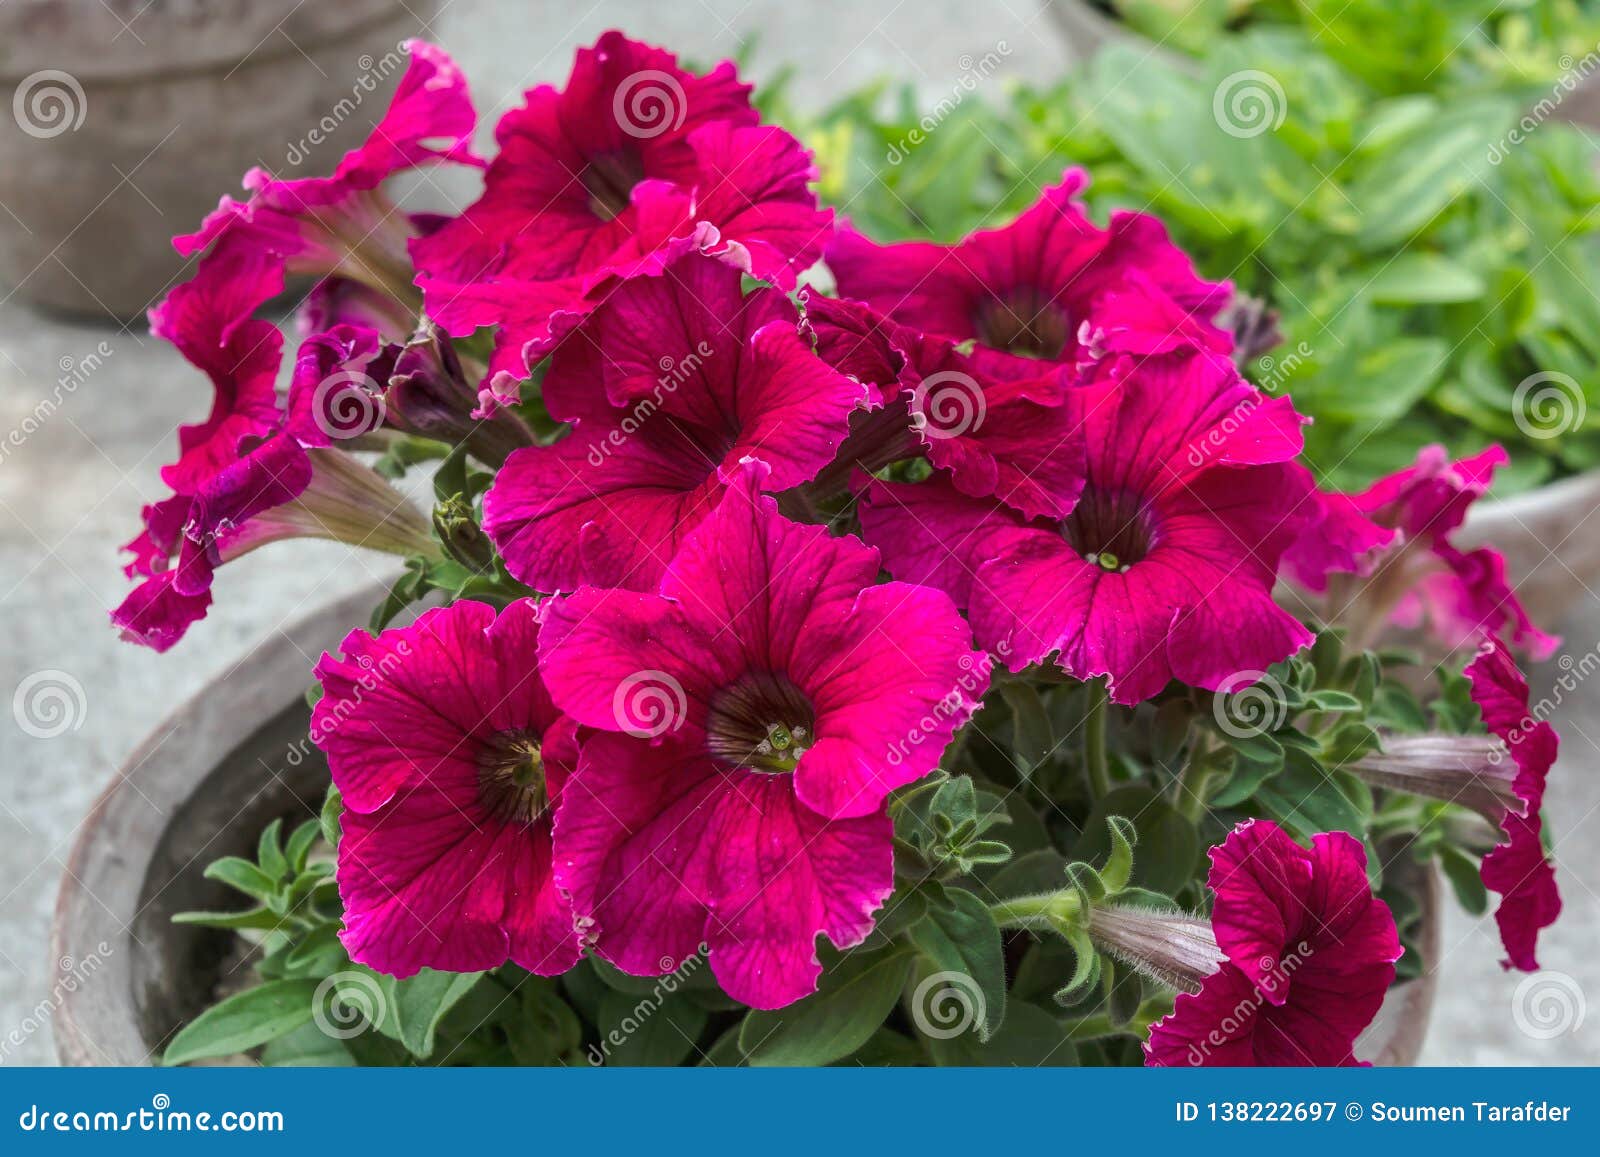 Lots of Magenta Color Petunia on a Clay Pot. Stock Image - Image of ...